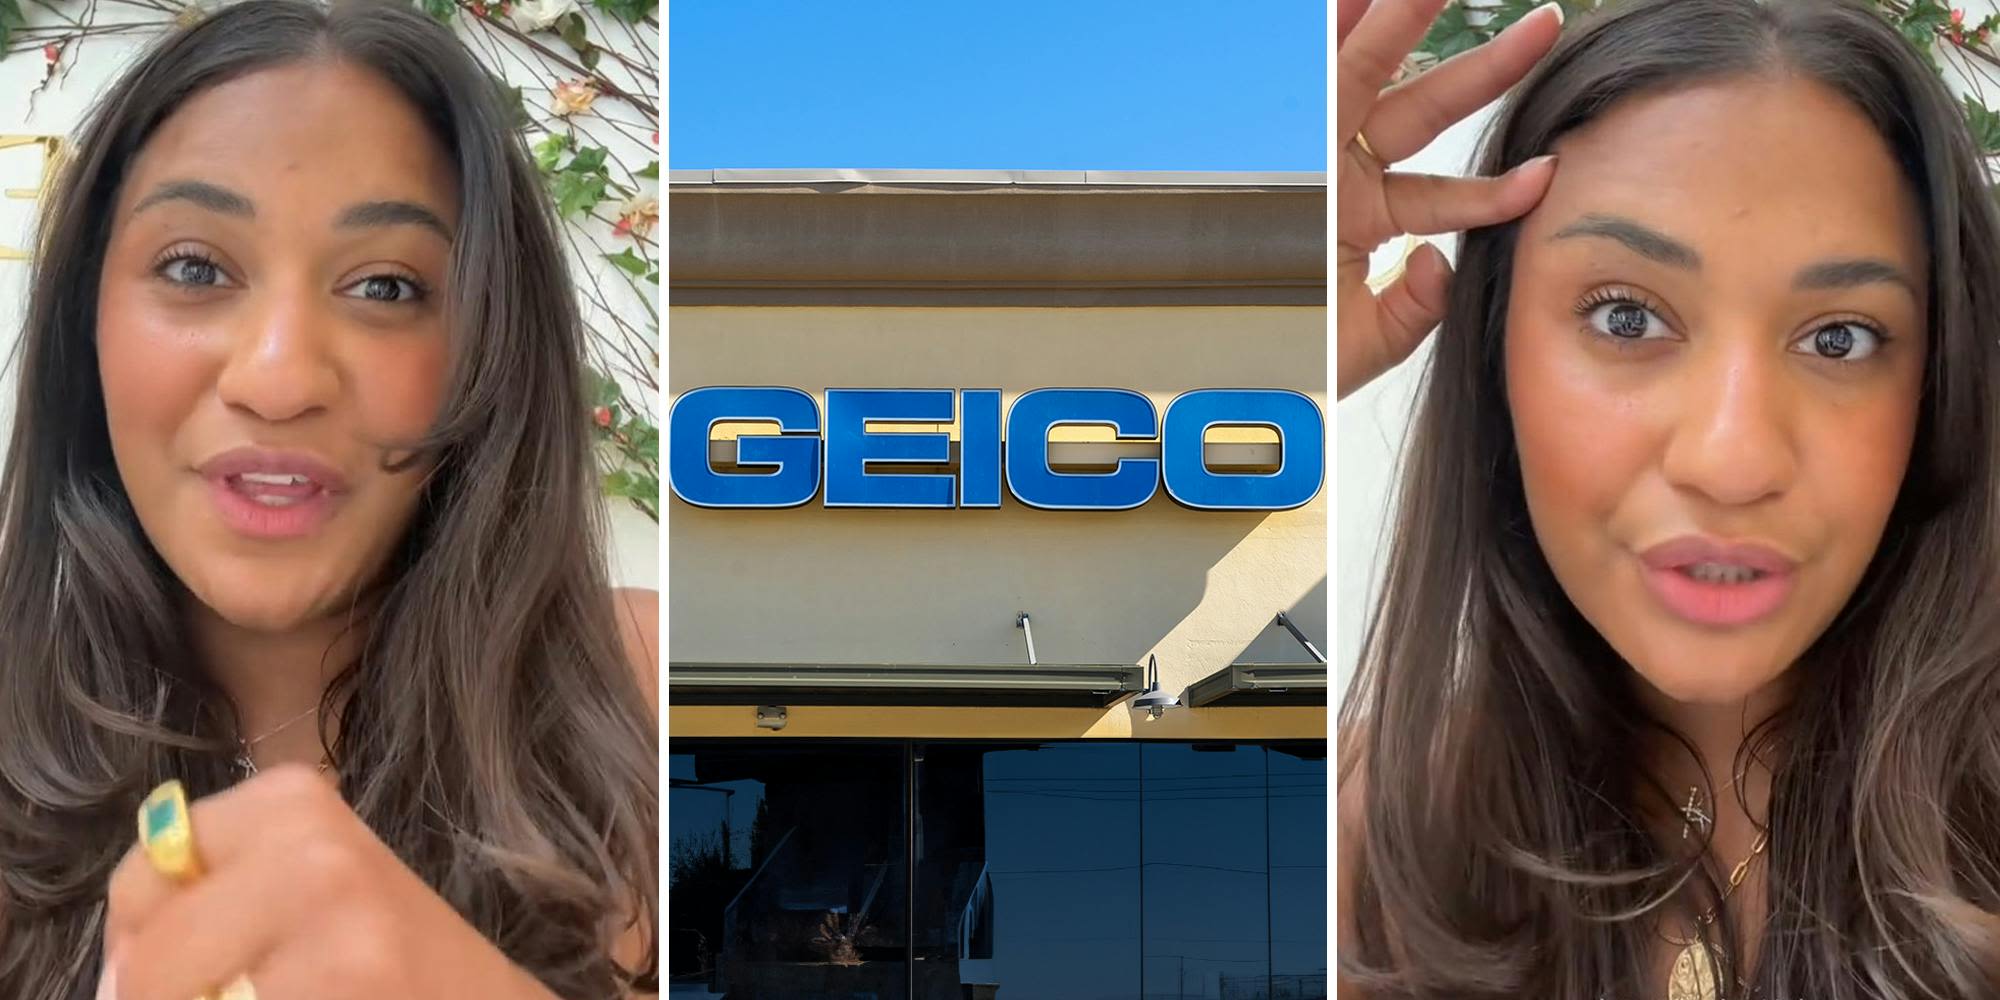 ‘That is more than the car payment’: Honda driver considers canceling Geico car insurance after monthly rate goes up without her knowledge, she gets charged $520